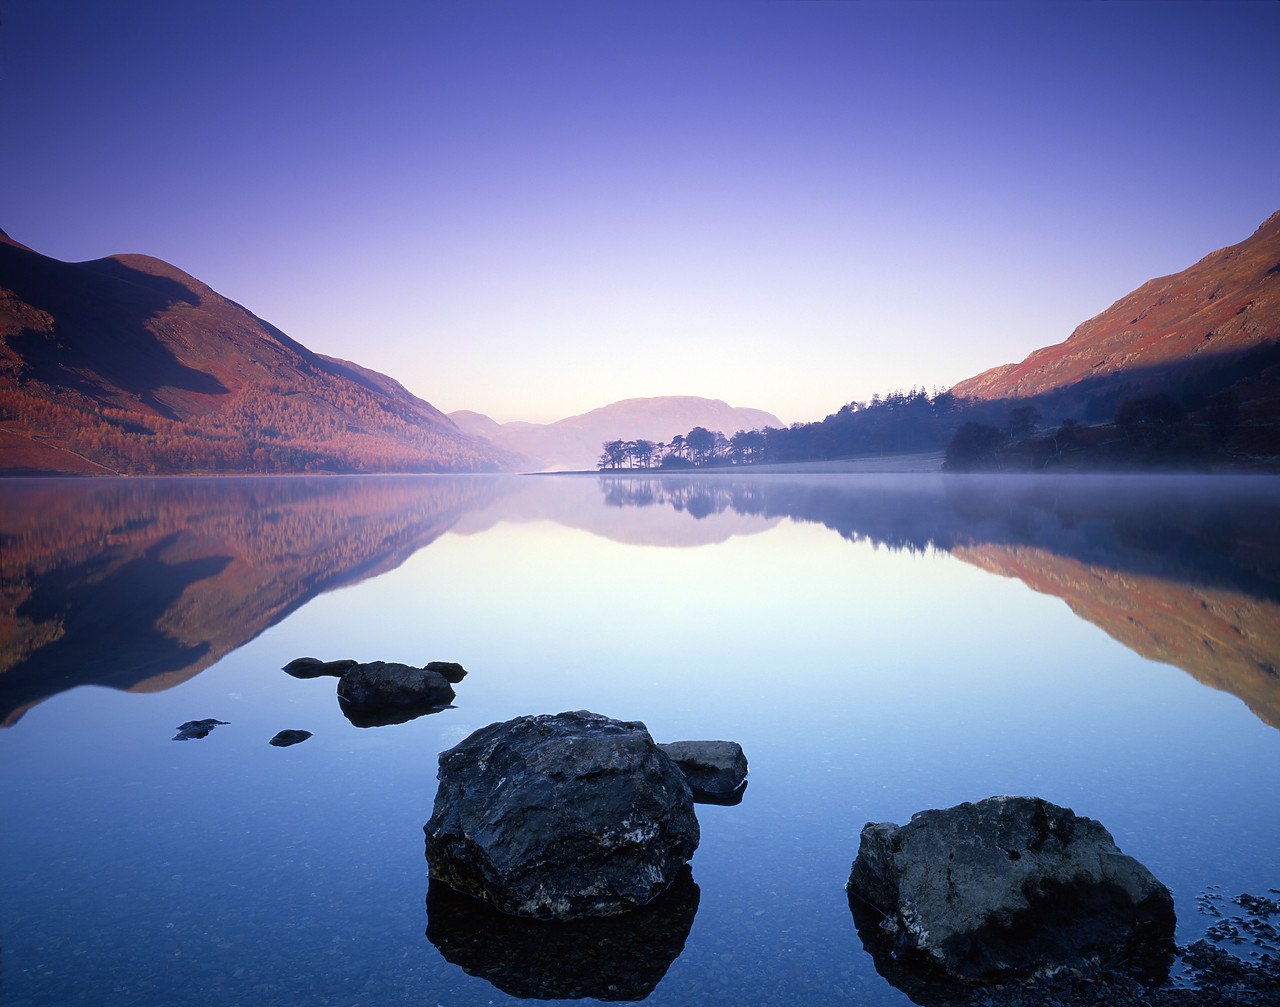 #871143-1 - Mist on Lake Buttermere, Lake District National Park, Cumbria, England